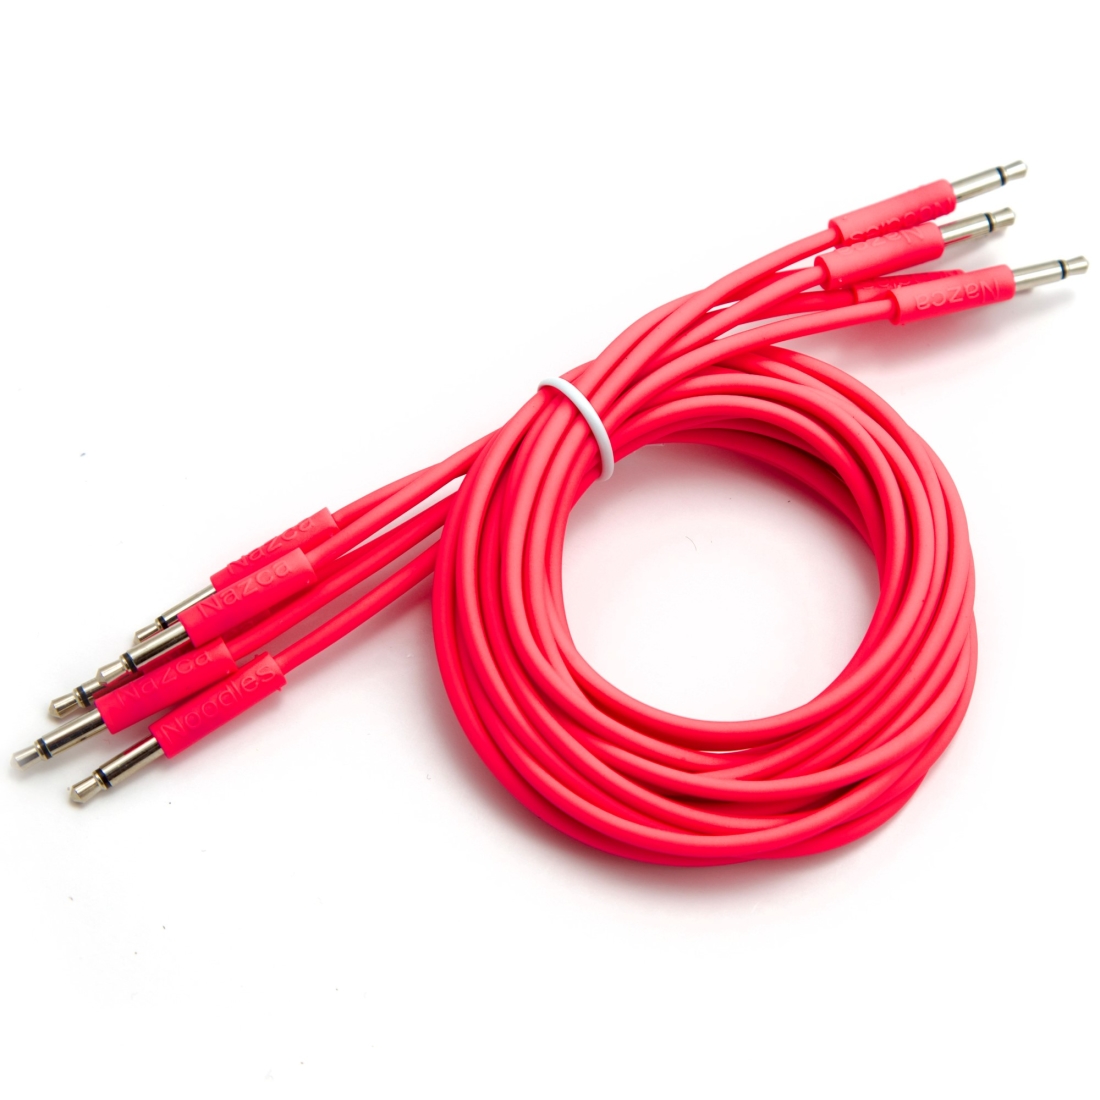 Patch Cables 3.5mm TS to 3.5mm TS - 300cm - Pink (2-Pack)